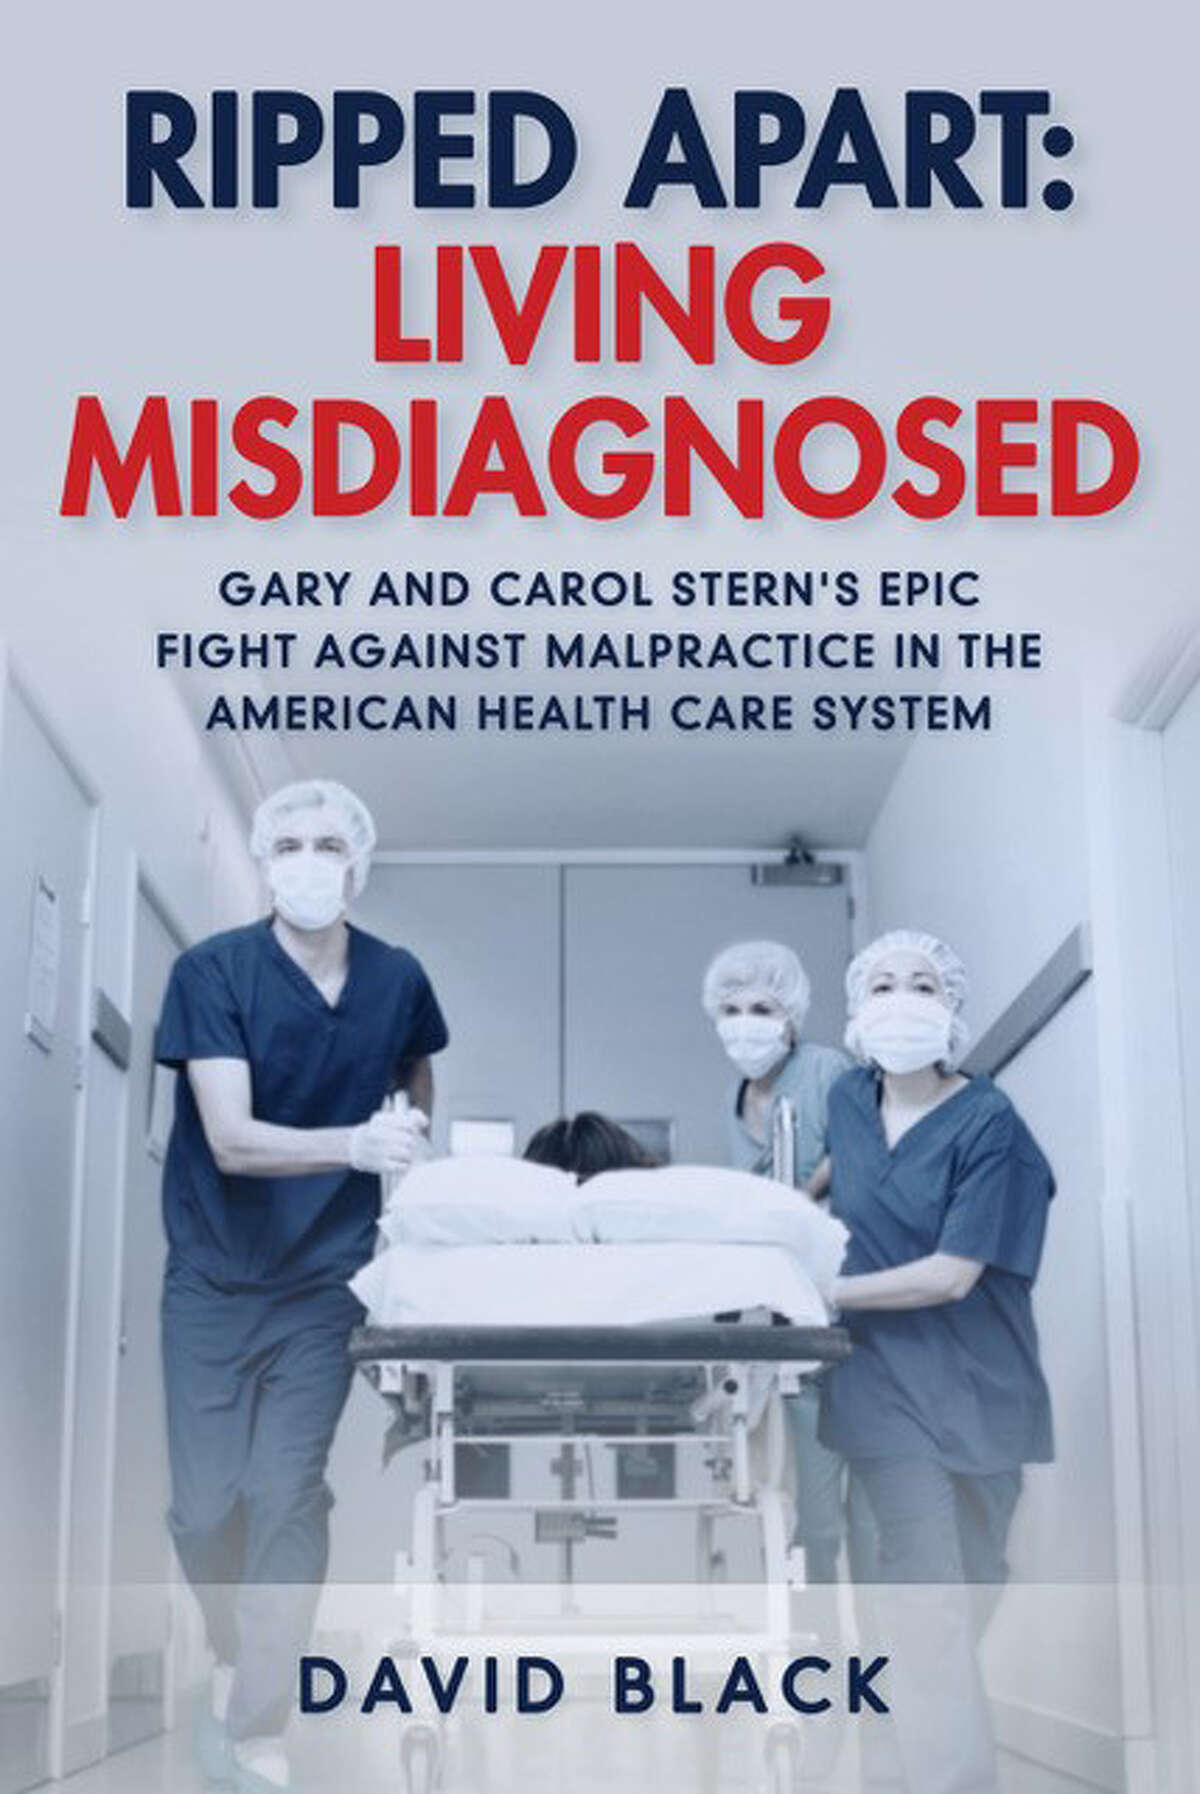 Cover image for David Black’s “Ripped Apart: Living Misdiagnosed,” a harrowing true story of one couple’s fight against malpractice in the American health care system.